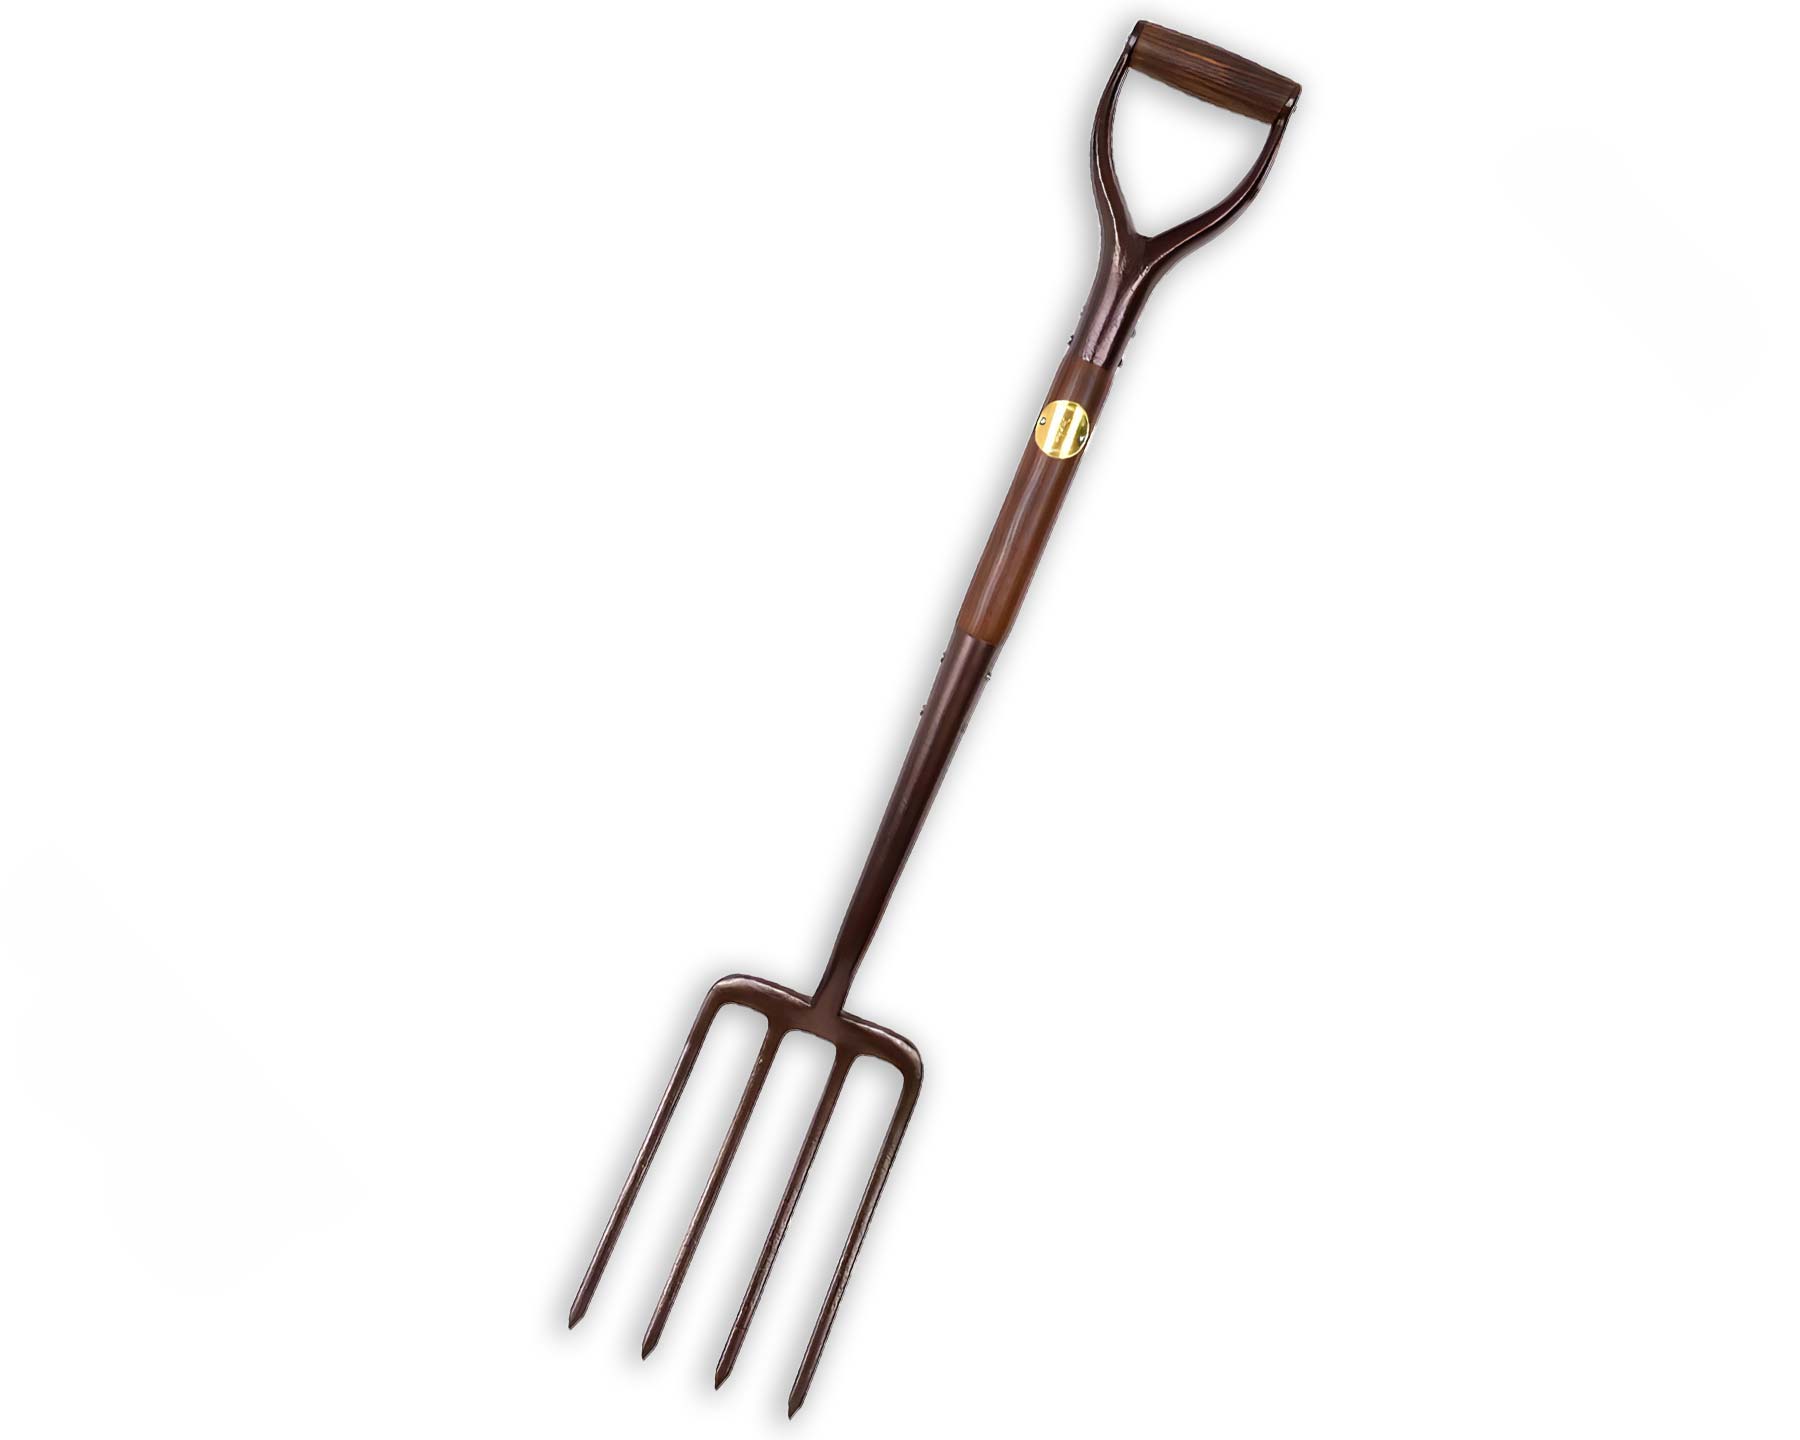 Garden Fork part of the new National Trust range of garden tools by Burgon and Ball